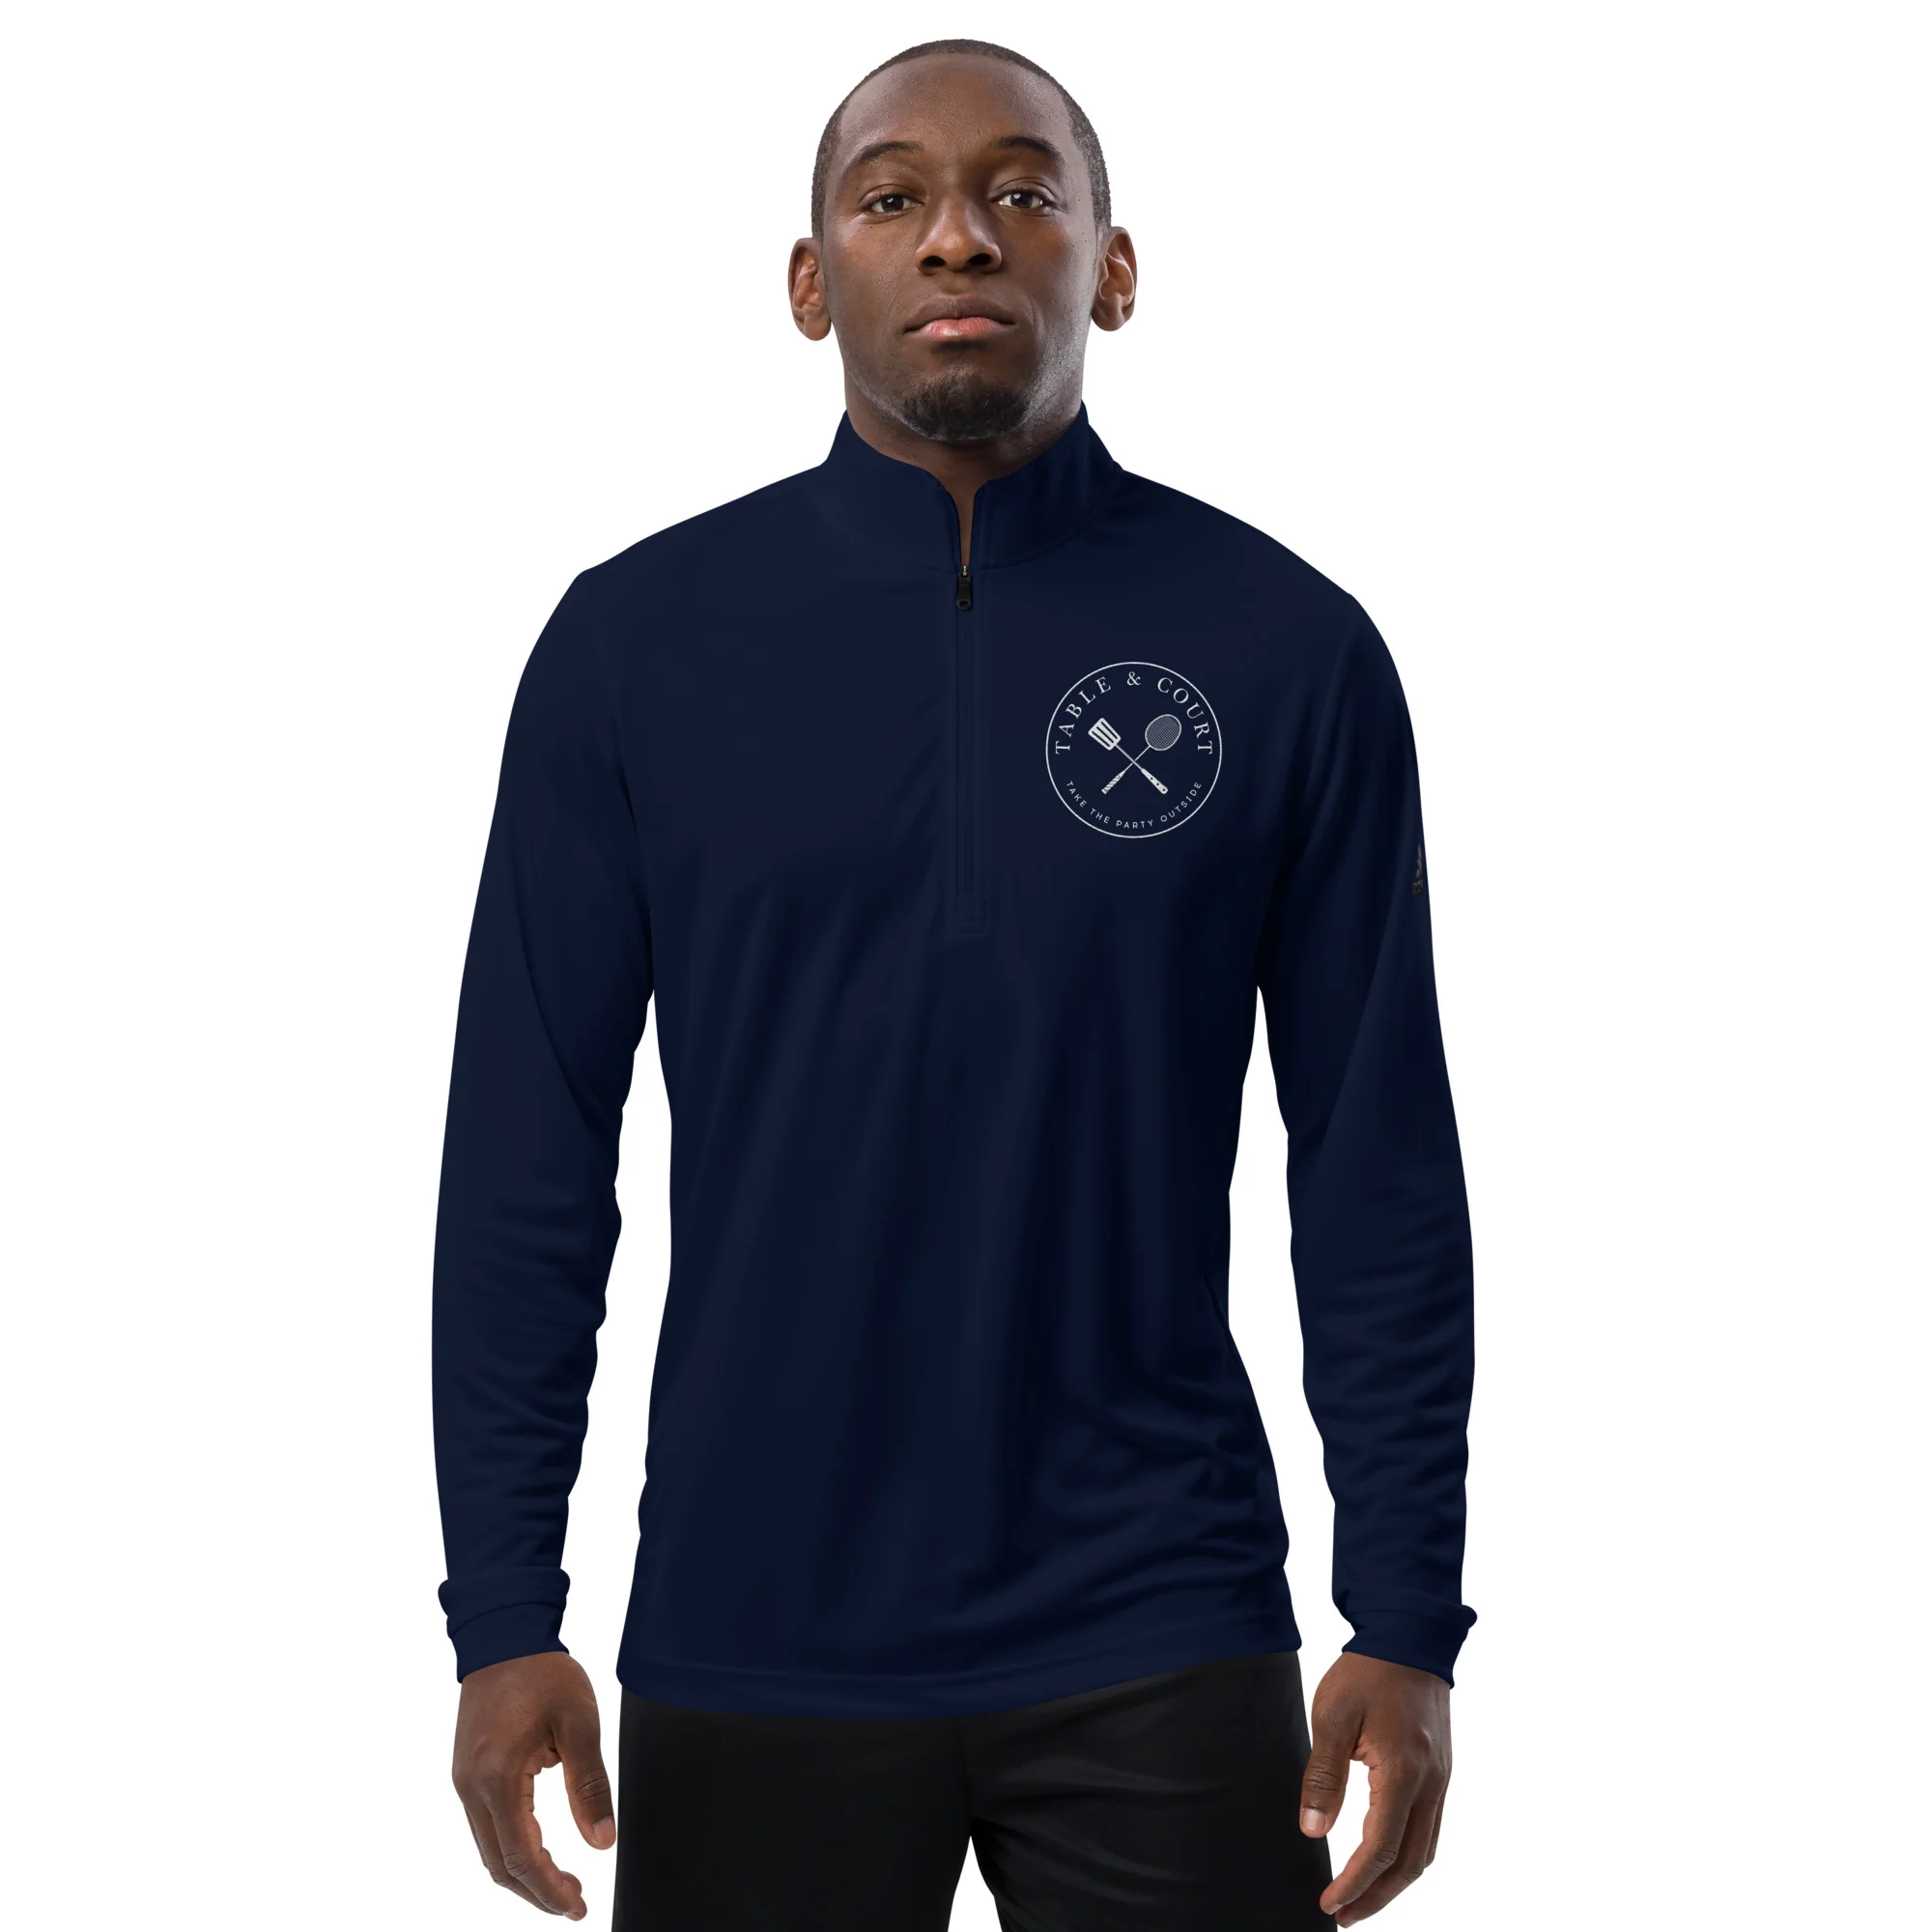 Mens Adidas Quarter Zip Pullover by Table and Court - White Logo - Navy